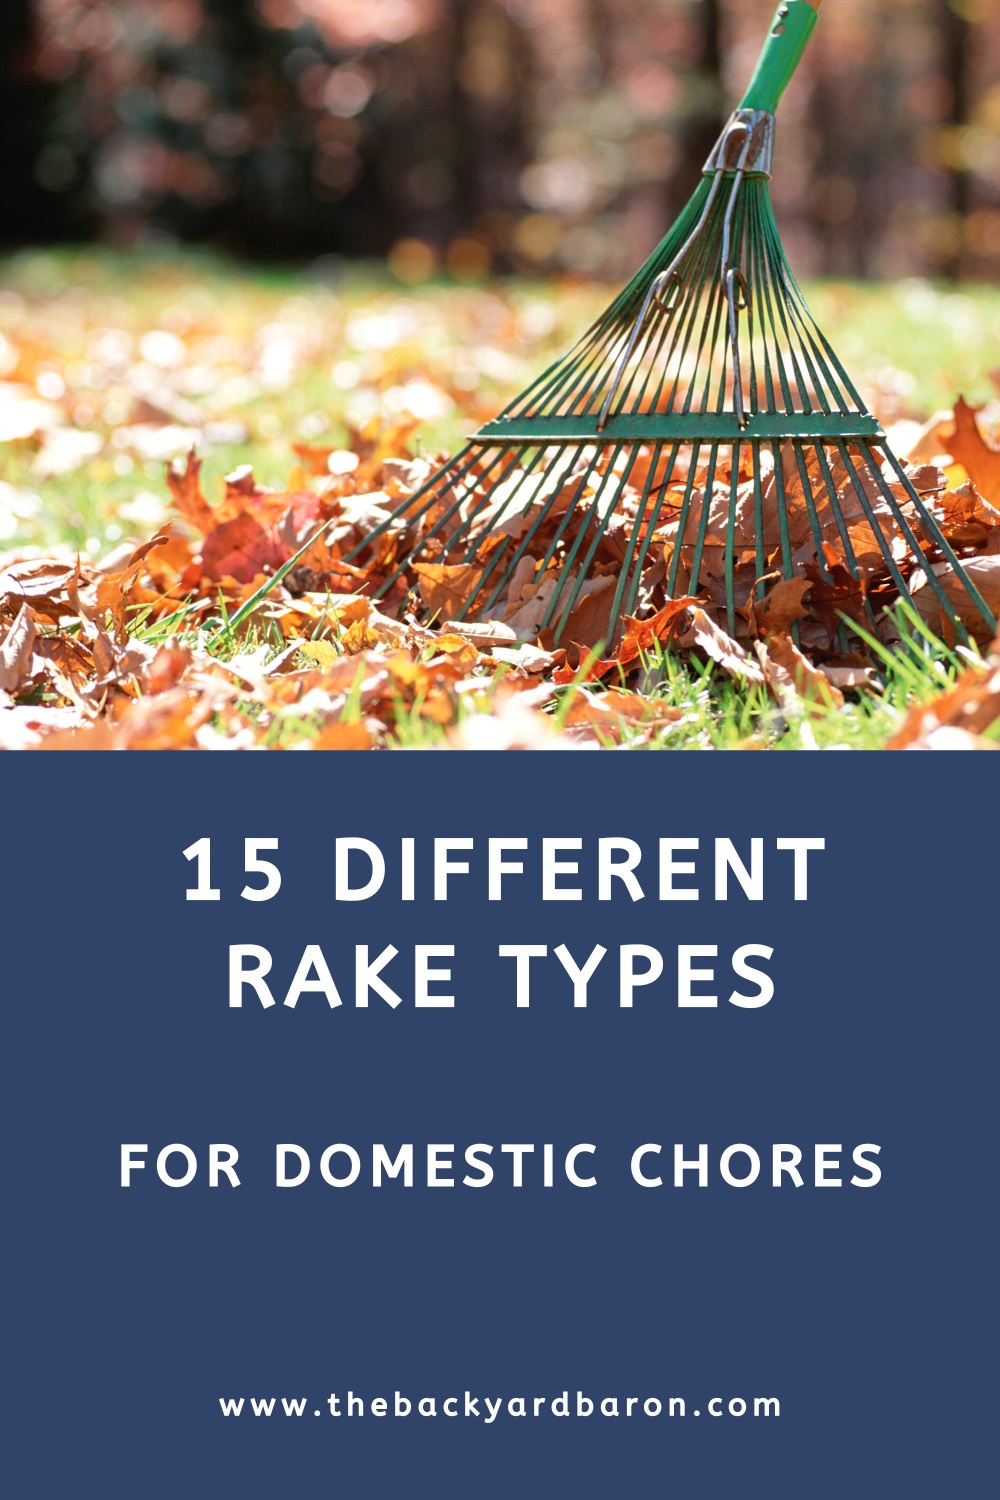 15 Different rake types for domestic use